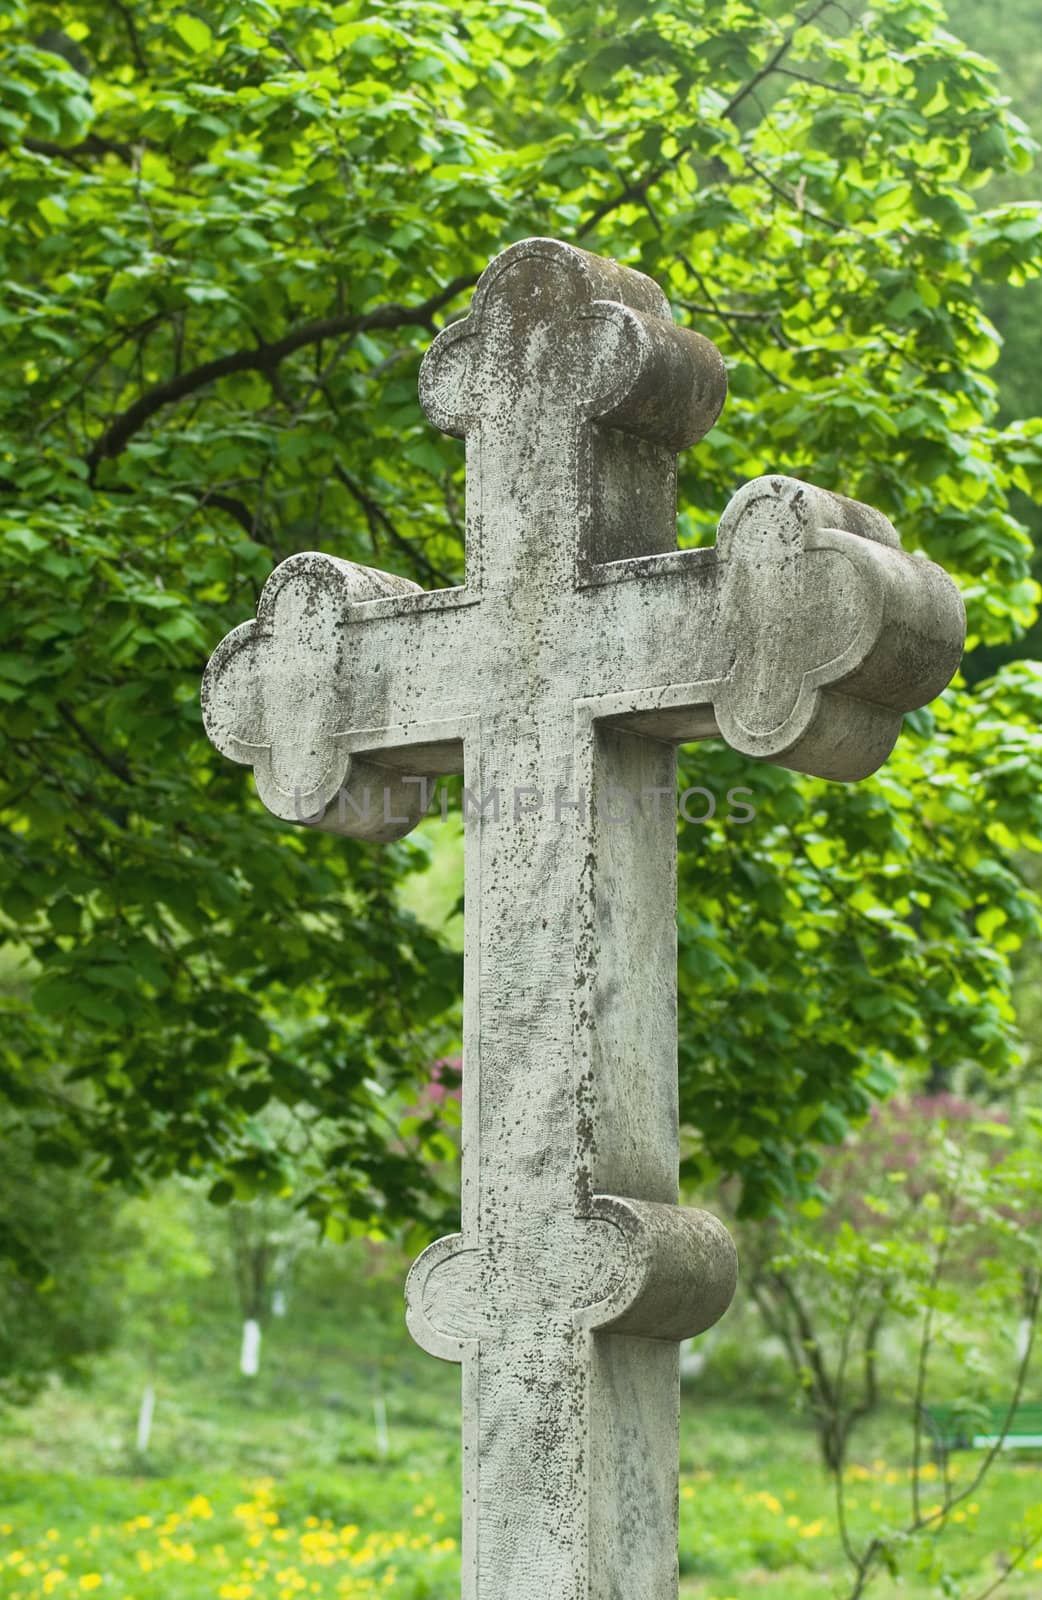 
christian stone cross on the unknown tomb